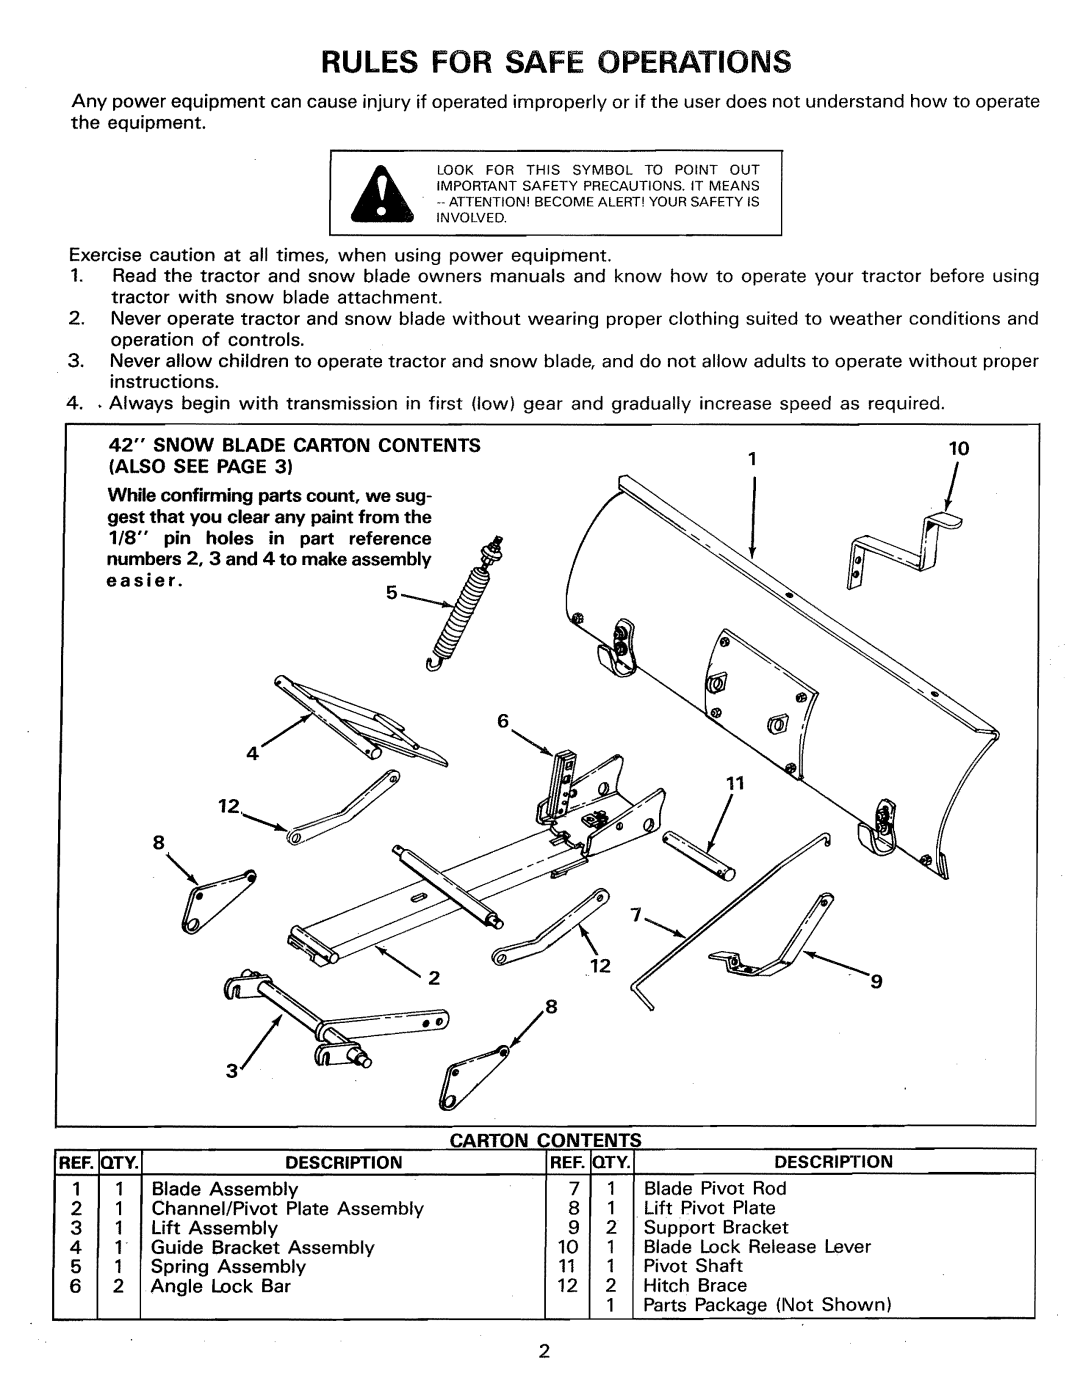 Sears 486.244062 owner manual Rules For Safe Operations 